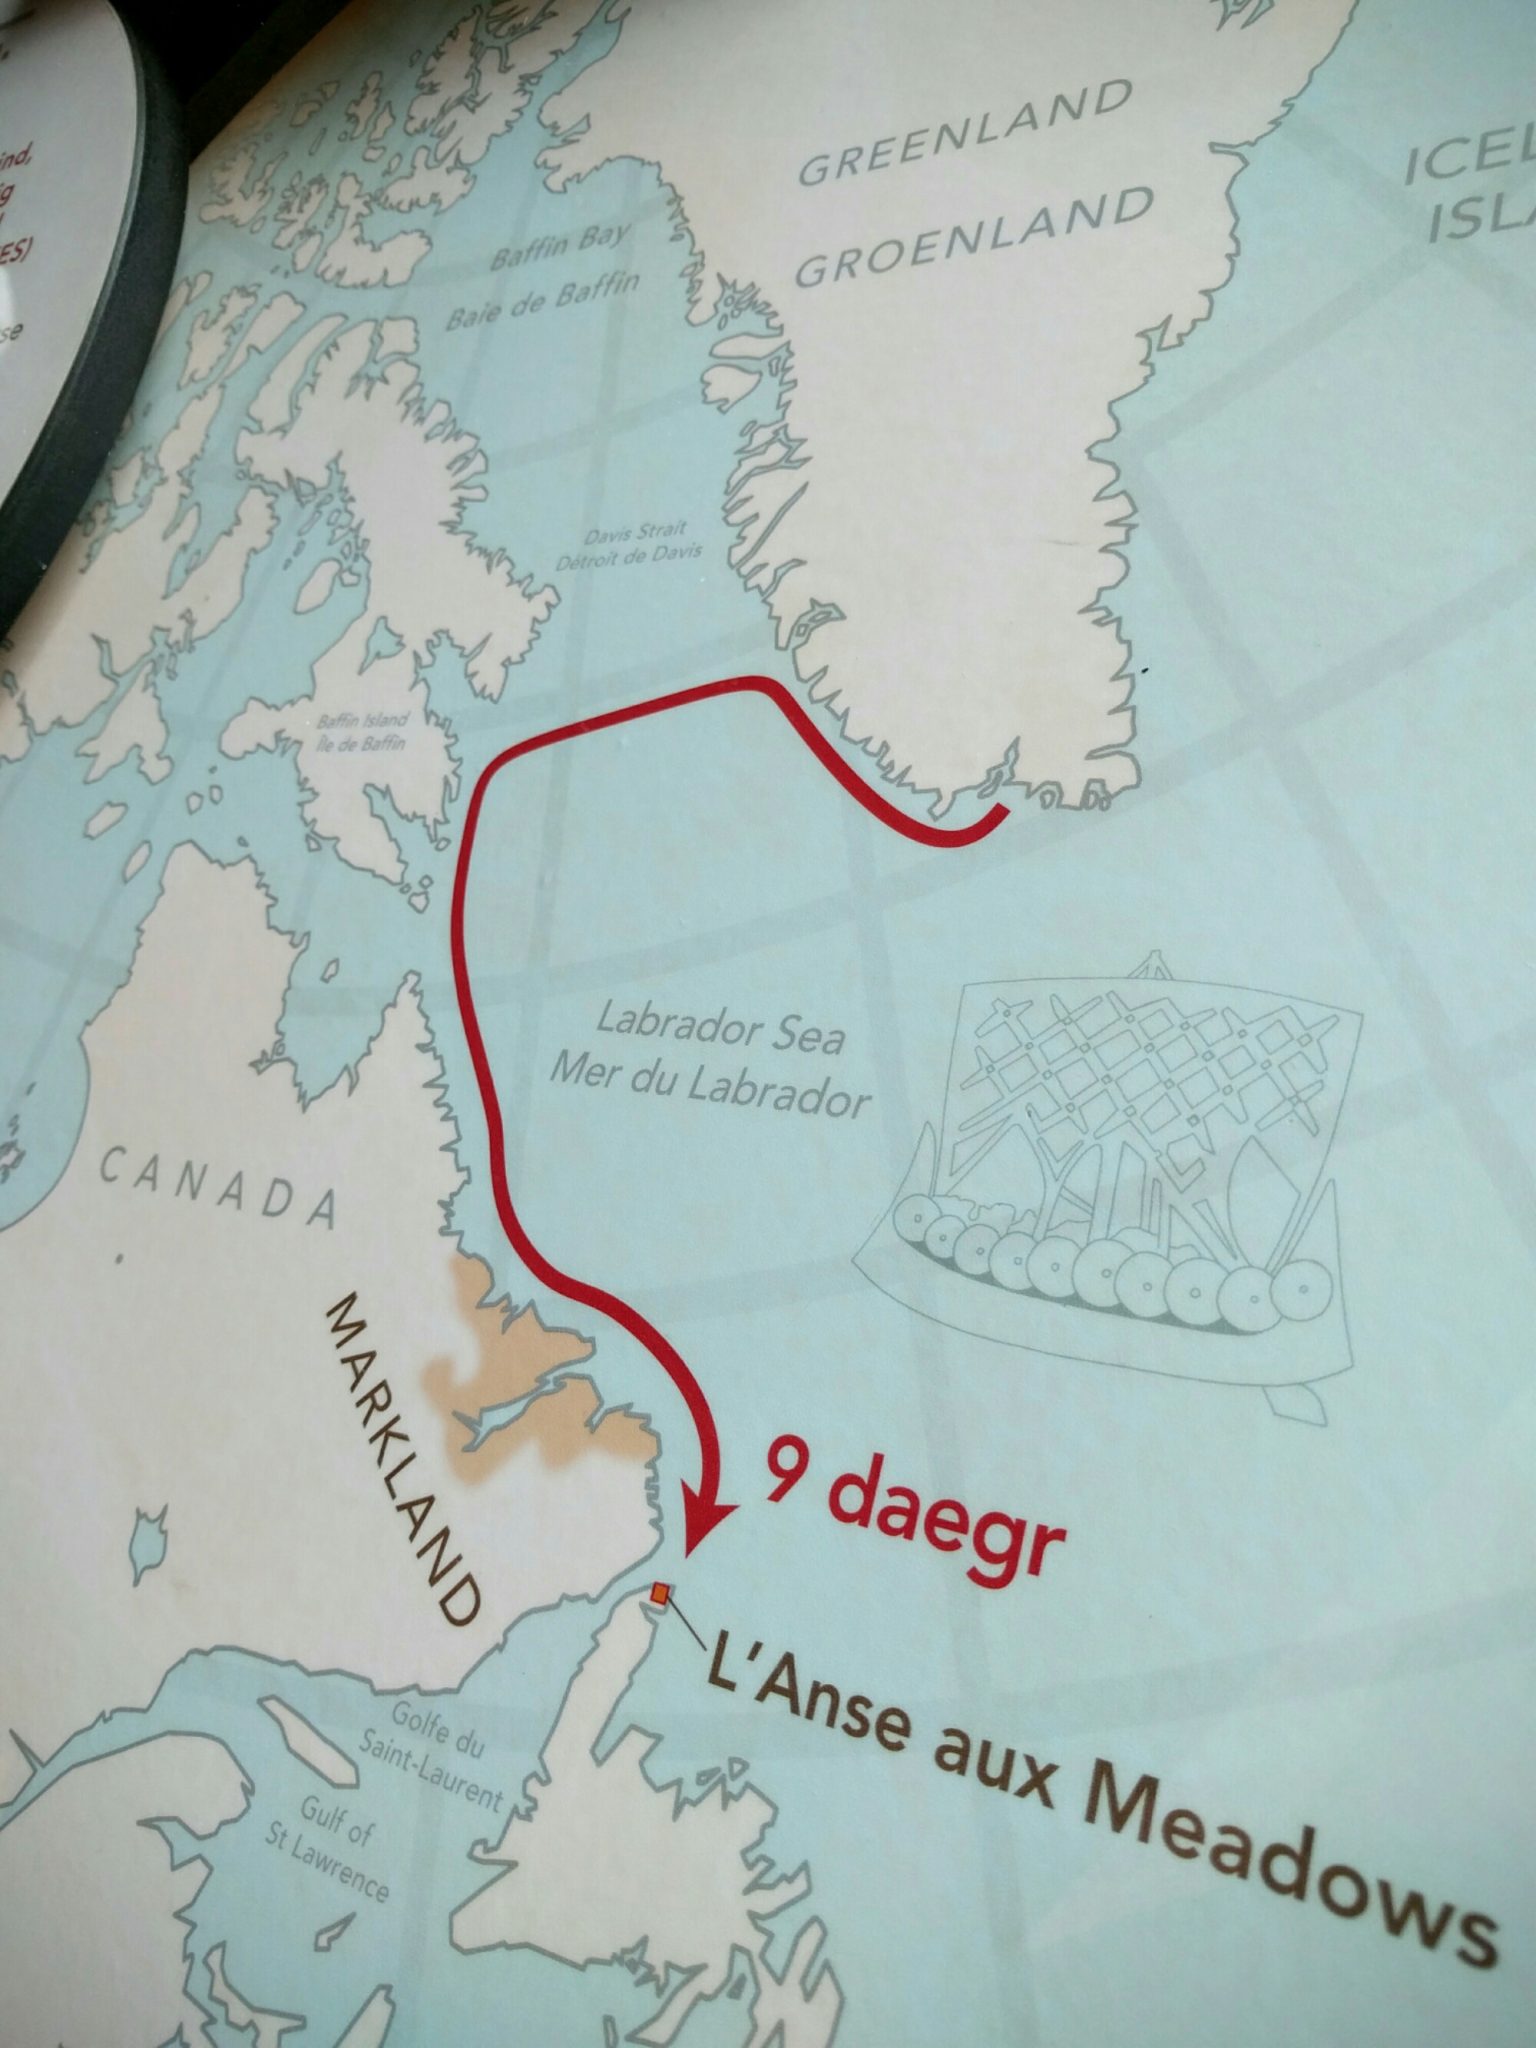 From Greenland to Newfoundland